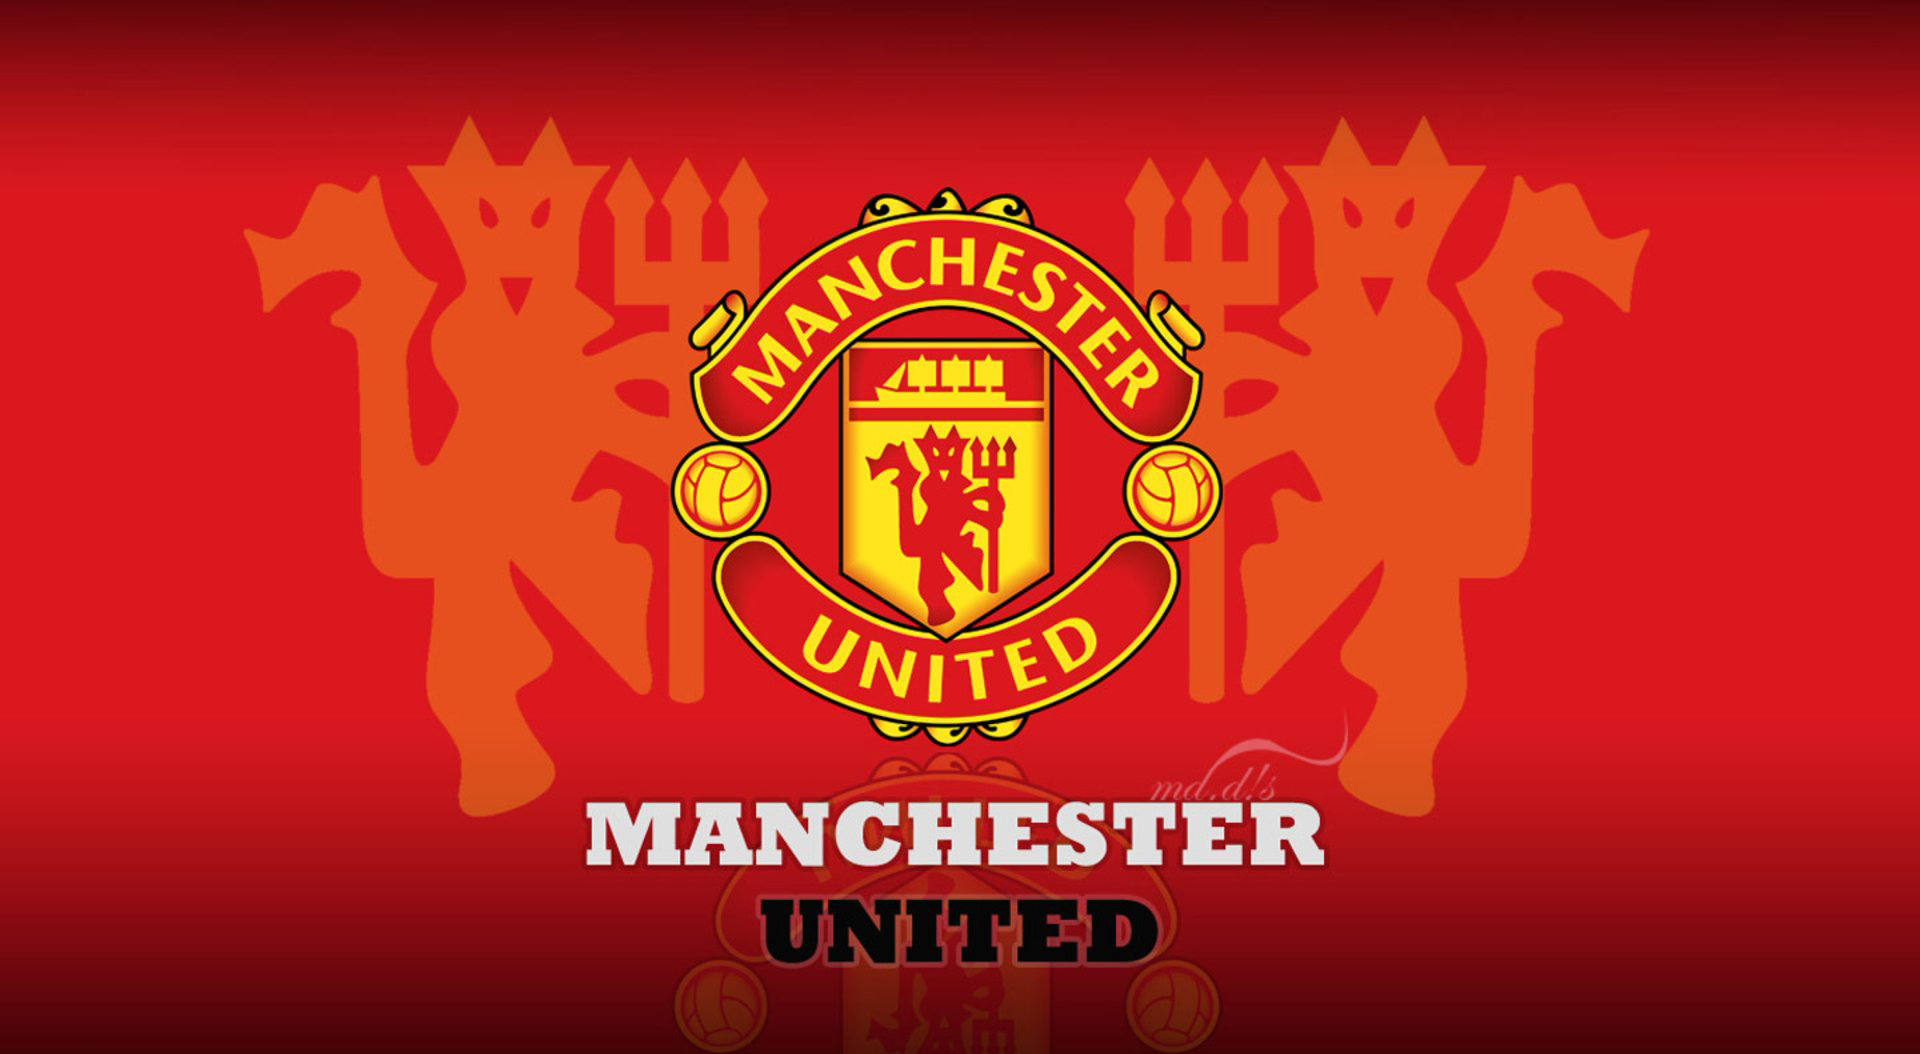 cool manchester united wallpapers,logo,font,red,emblem,text